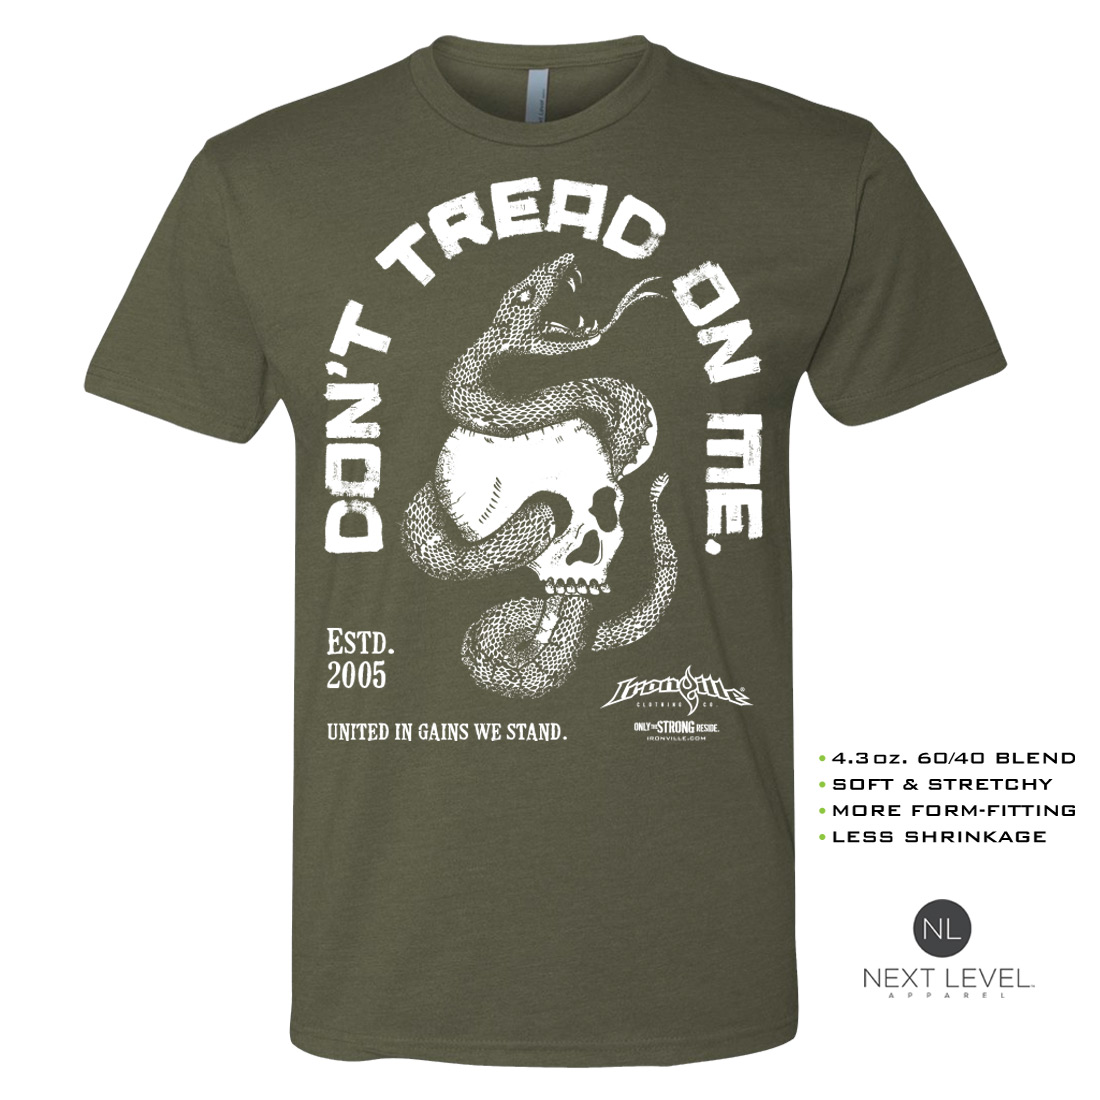 Don't Tread On Me - PREMIUM FITTED T-SHIRT